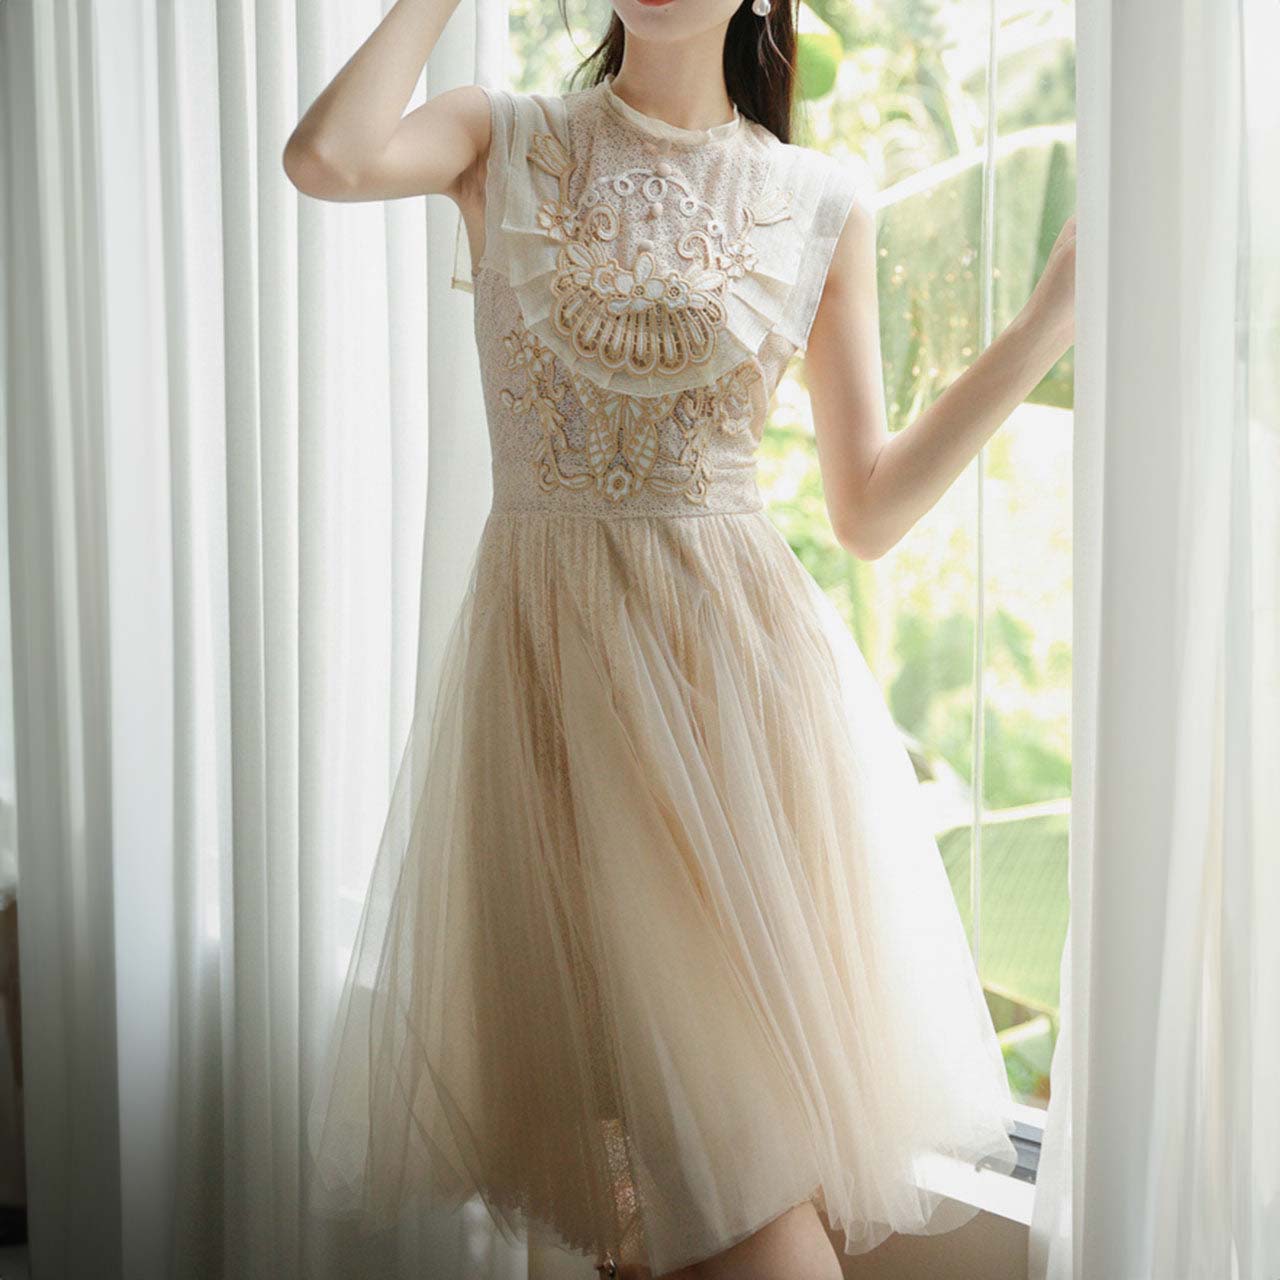 Enchanted Blush Tulle Dress with Golden Embroidery